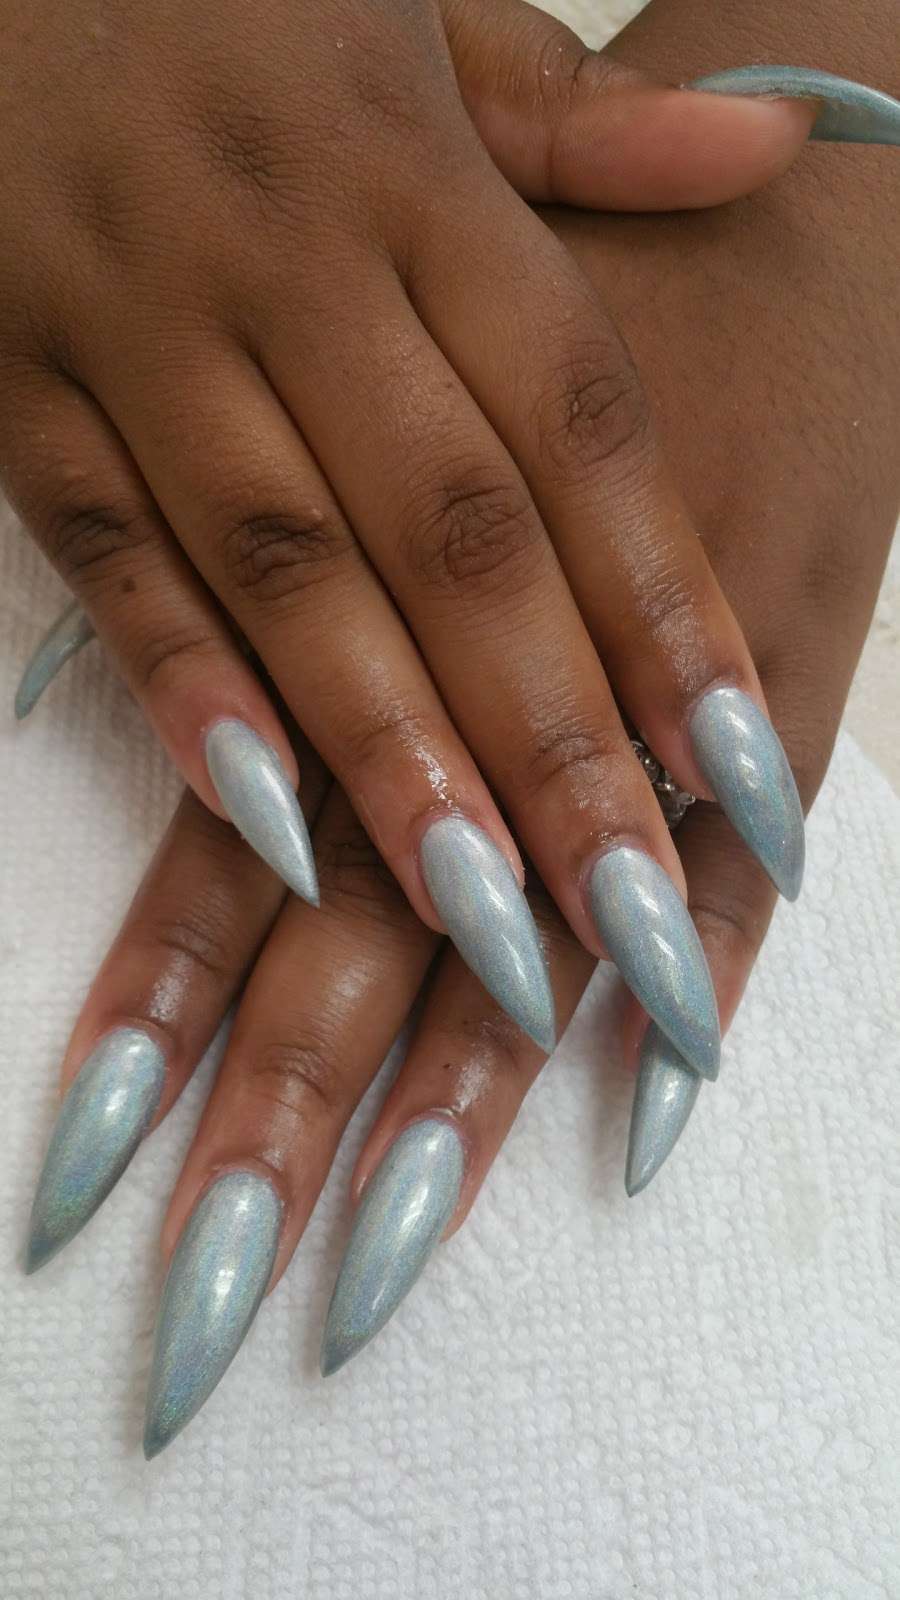 Lovely Nails | 5248 Marlboro Pike, Coral Hills, MD 20743 | Phone: (301) 420-7776